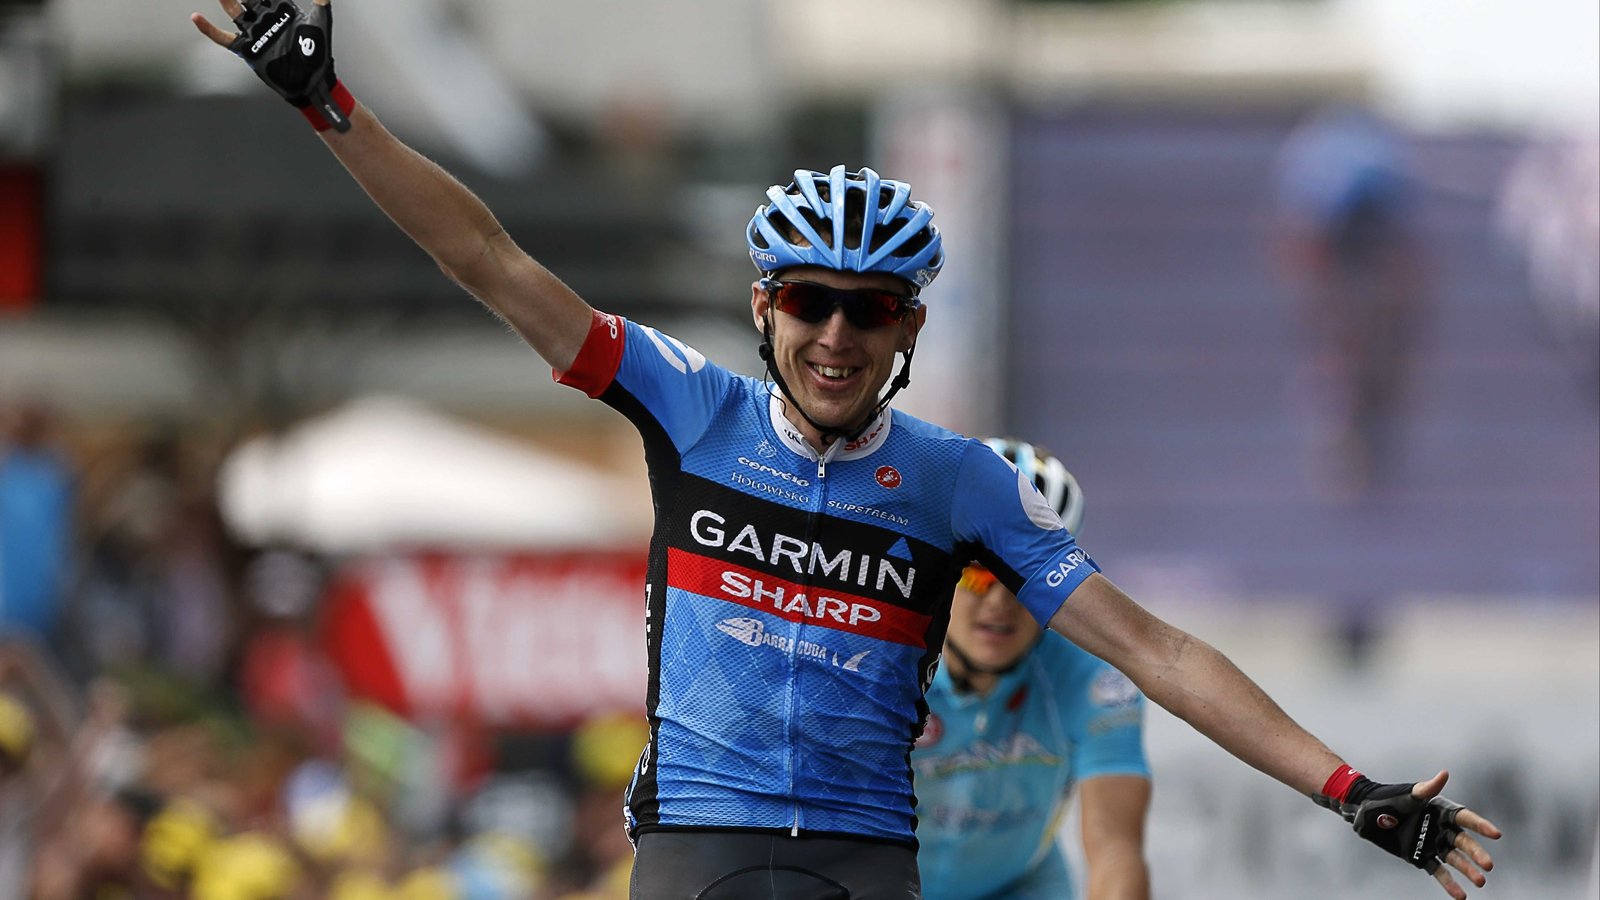 First Tour de France stage victory for Martin